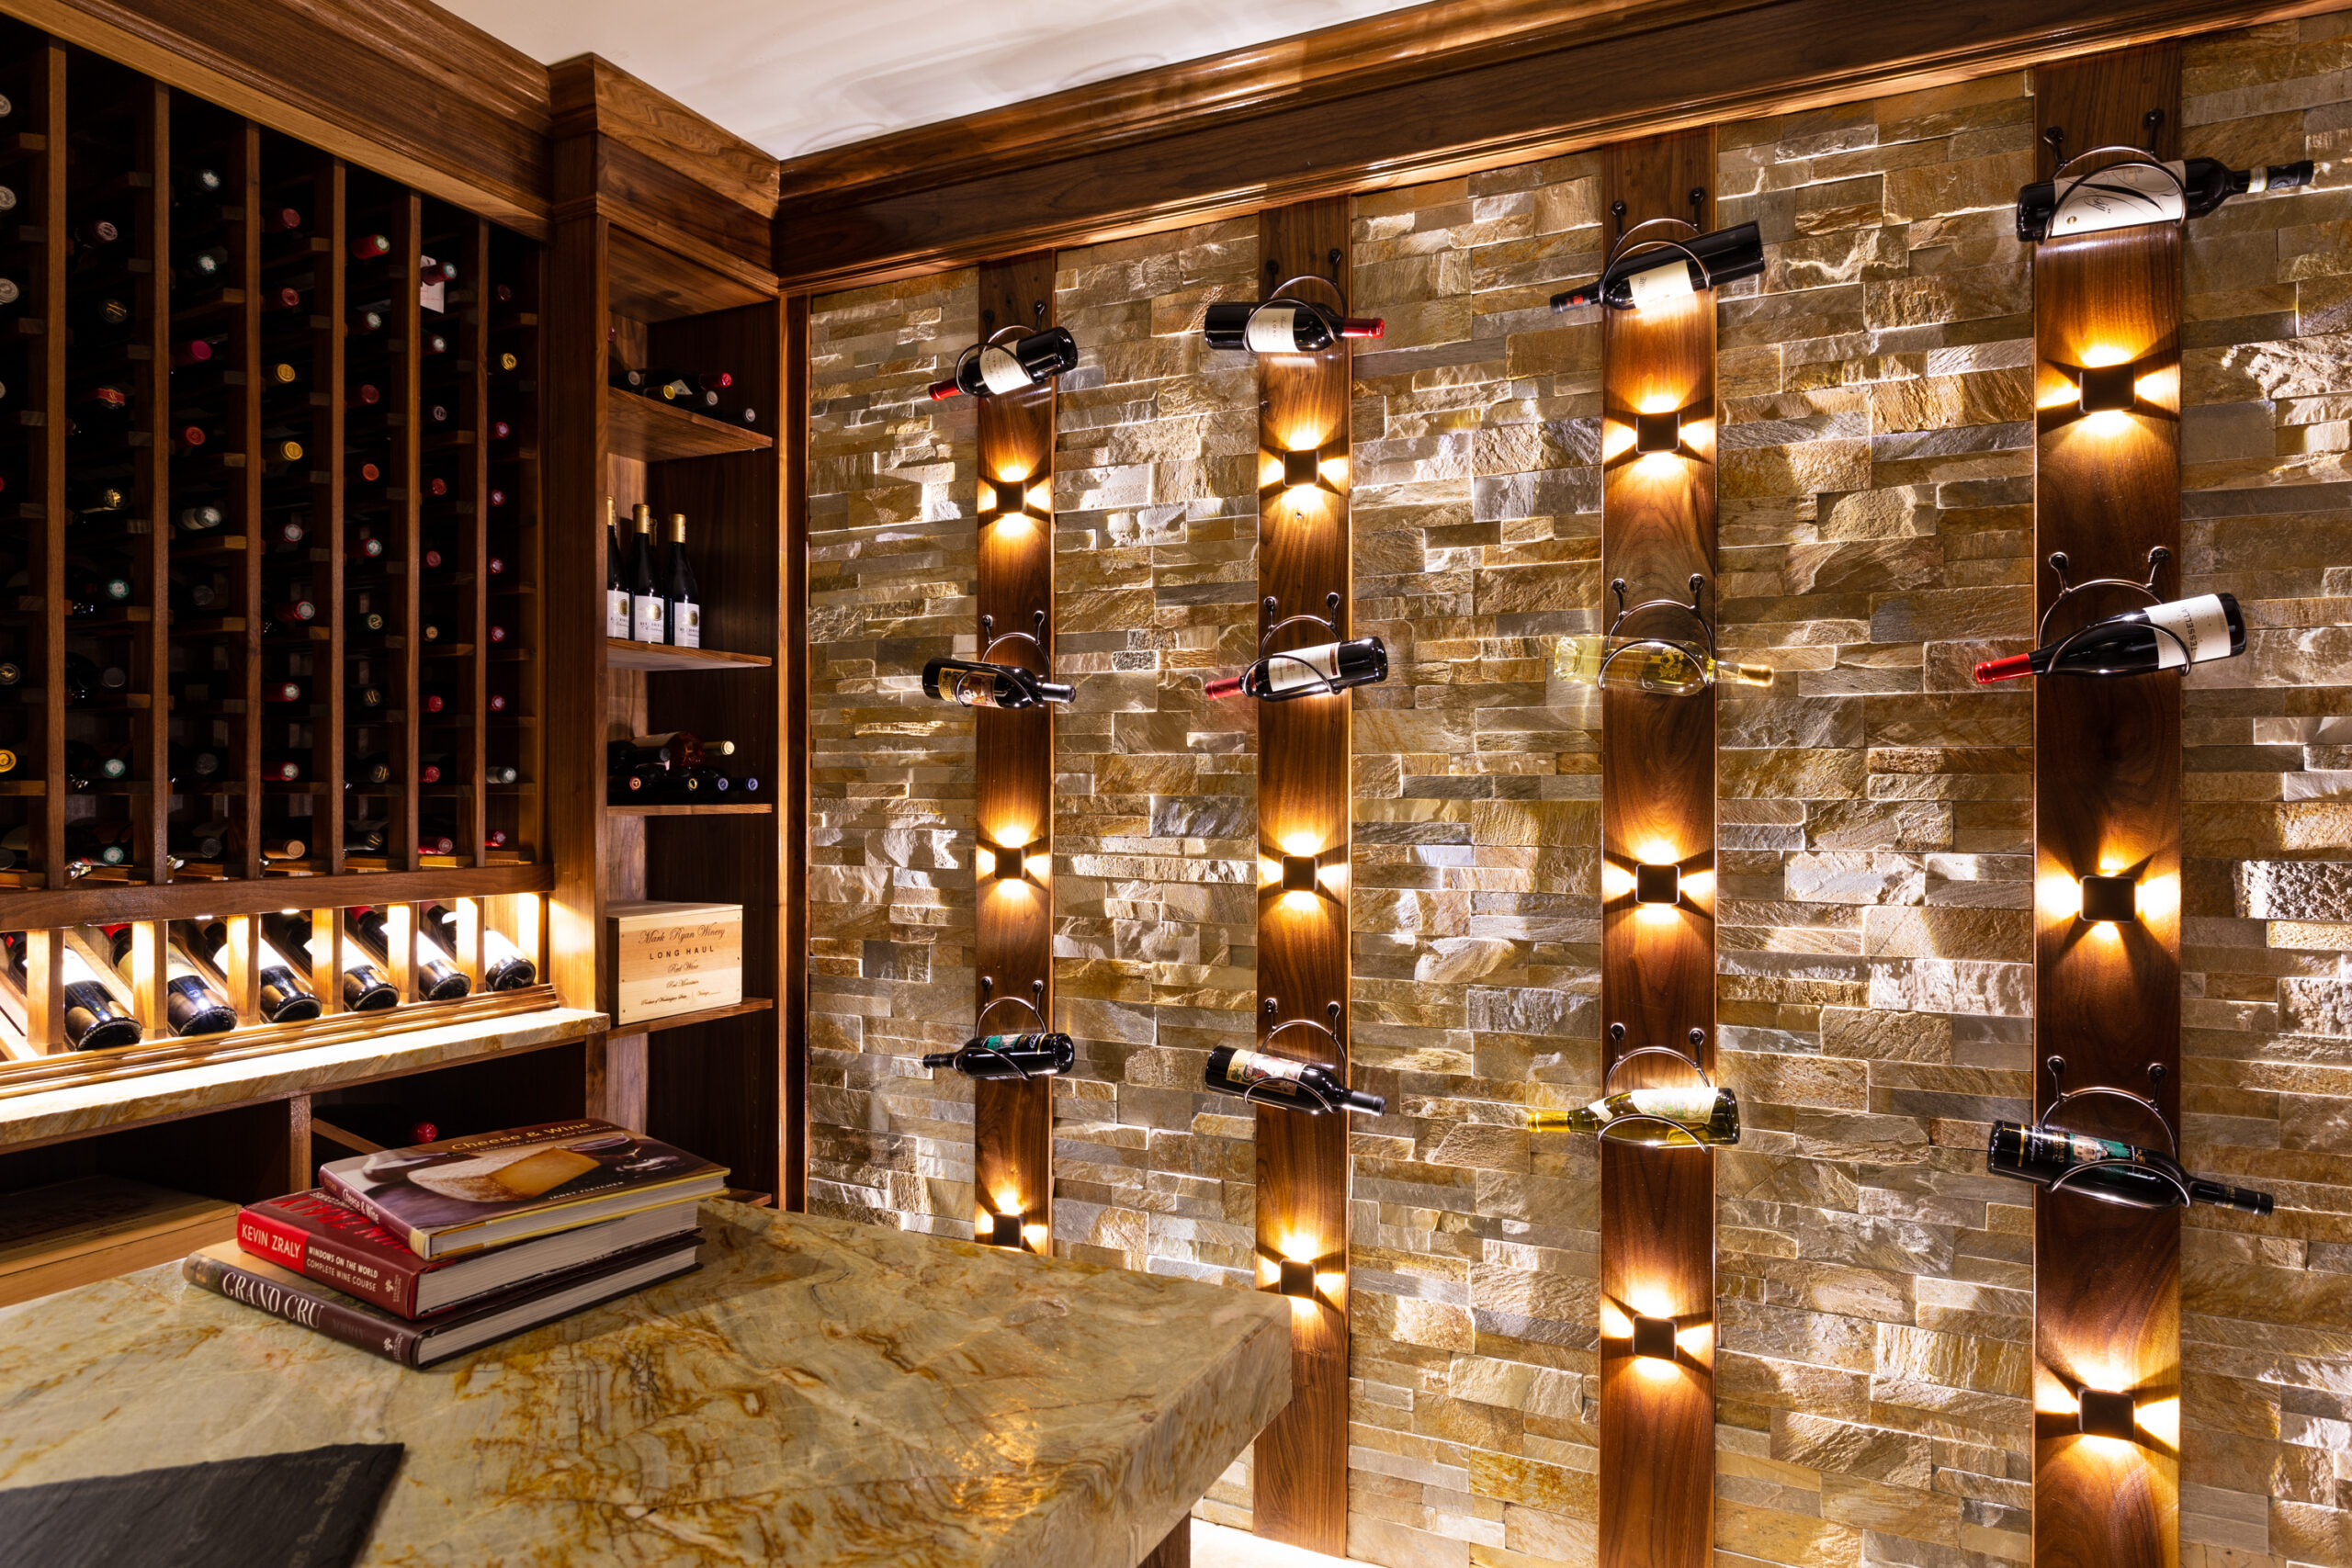 The image features an elegant wine storage area, characterized by:

Wooden Shelves: Bottles of wine are neatly displayed on wooden mounts.
Stone Wall: The backdrop of the storage area, adding a rustic touch.
Soft Lighting: Each bottle is highlighted by individual lights, creating a warm ambiance.
Marble Countertop: A sophisticated touch in the foreground with books stacked on top.
This setting conveys an upscale and inviting atmosphere for wine connoisseurs.